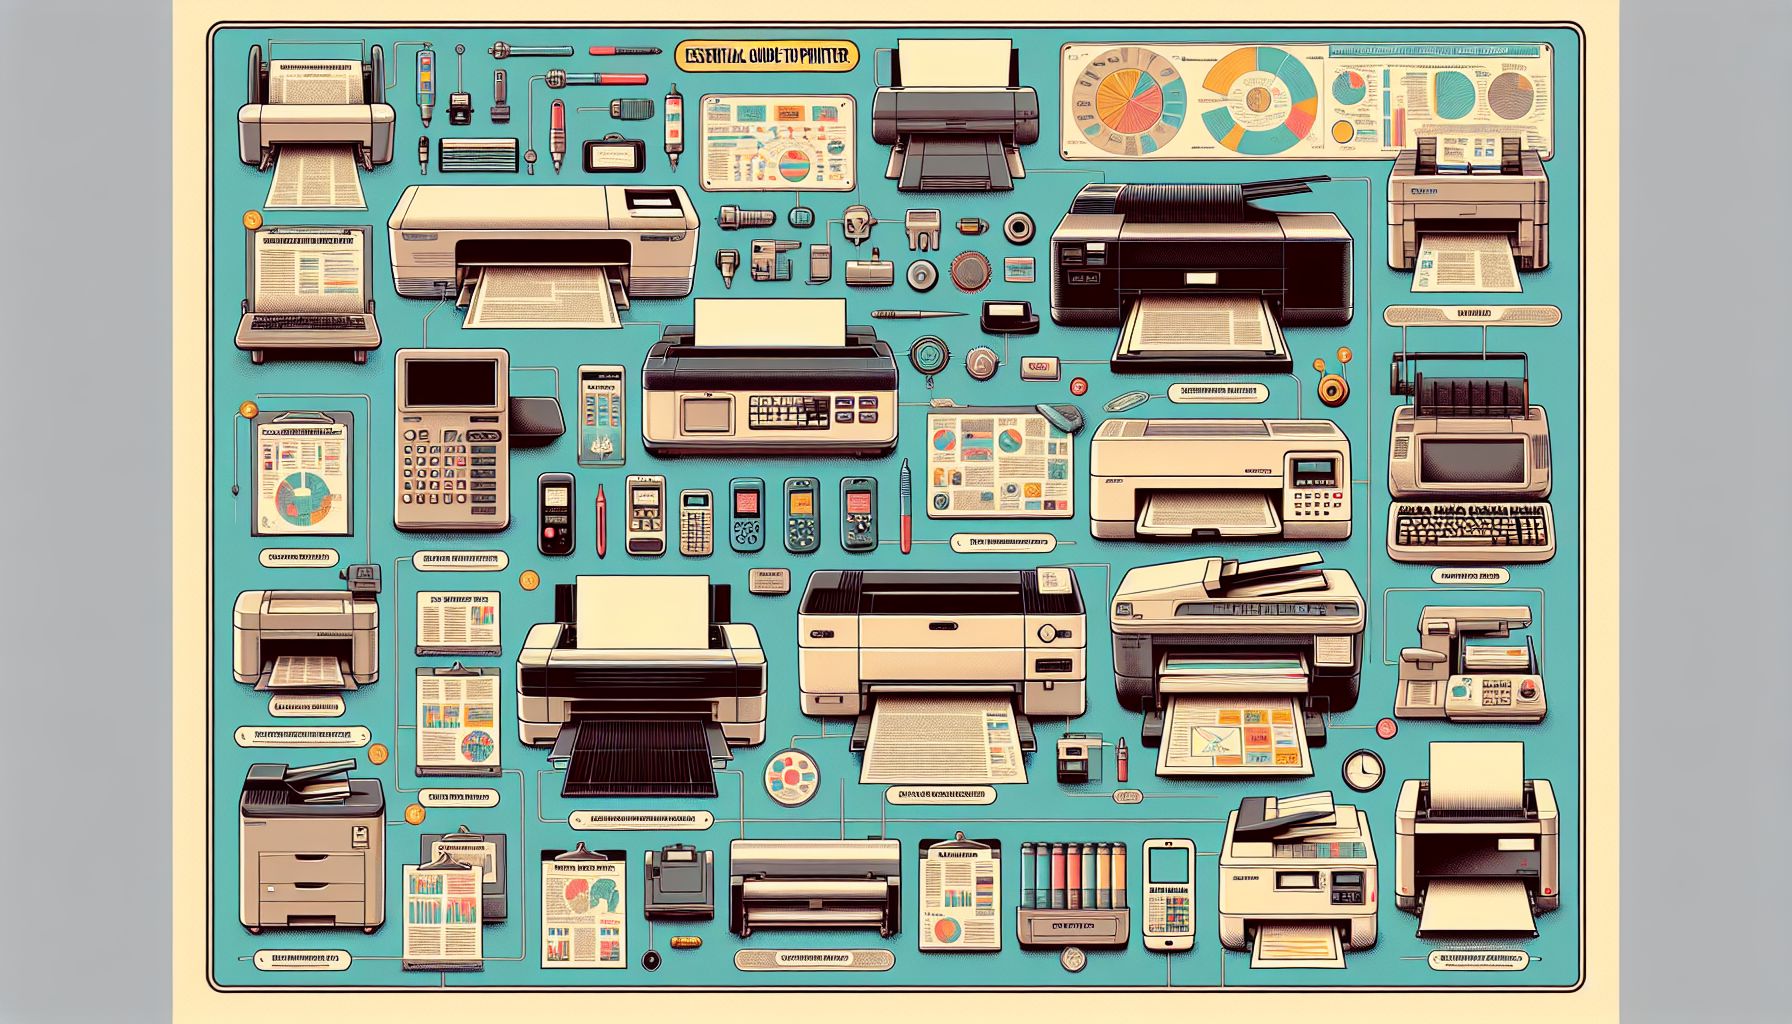 The Essential Guide to Printers